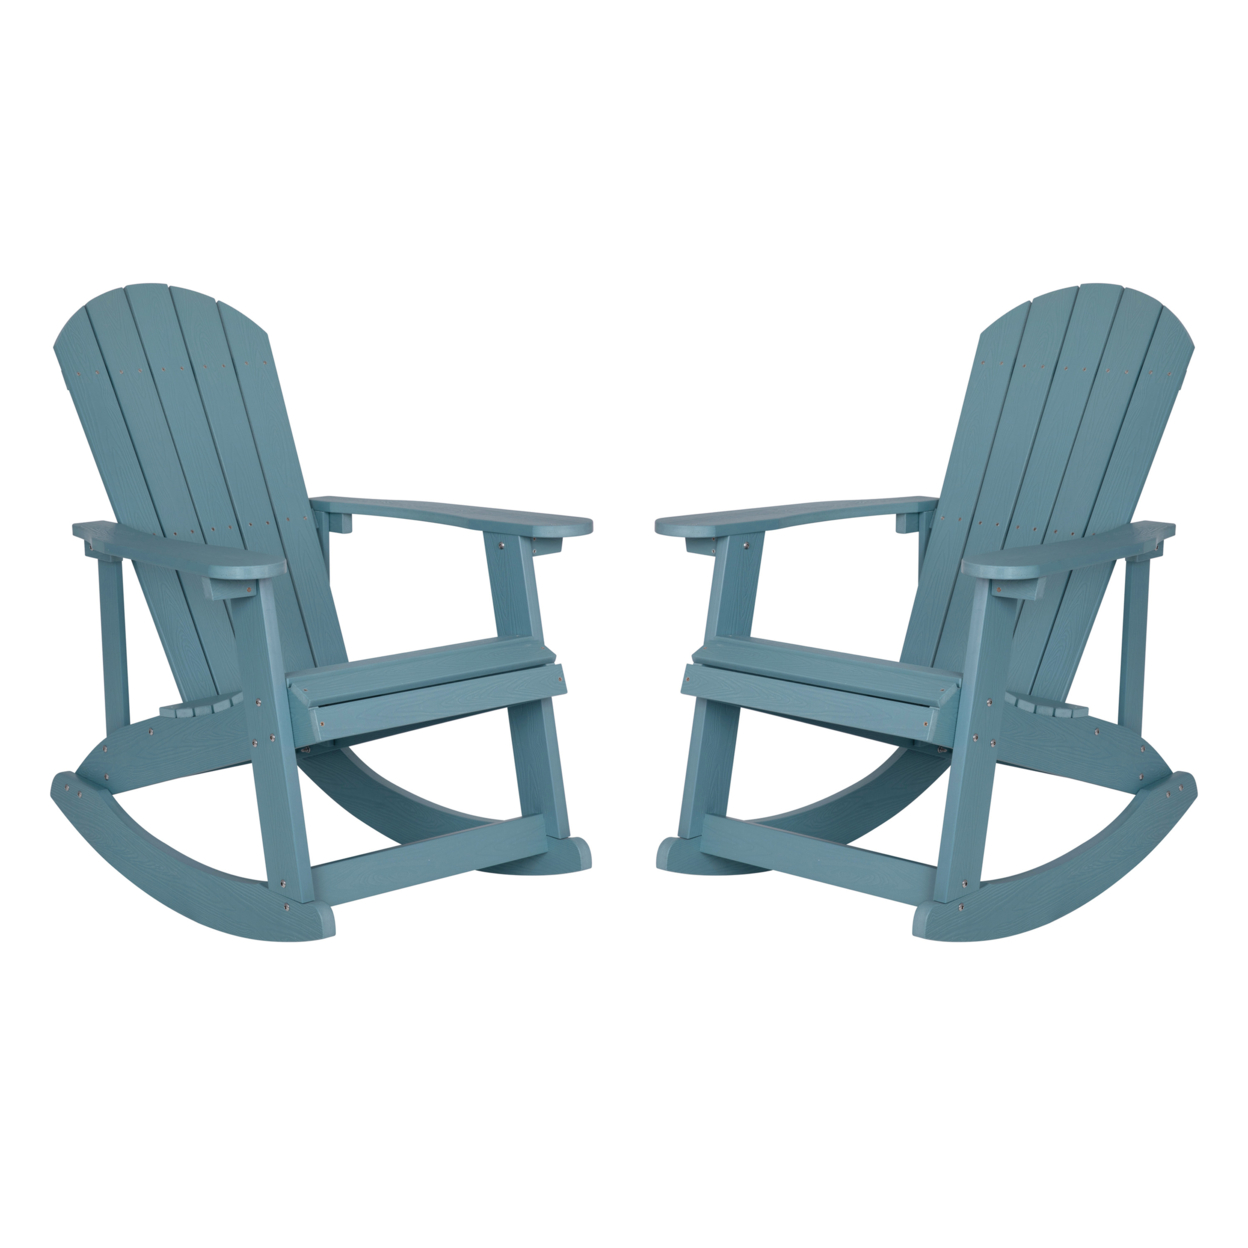 Savannah All-Weather Poly Resin Wood Adirondack Rocking Chair With Rust Resistant Stainless Steel Hardware In Sea Foam - Set Of 2